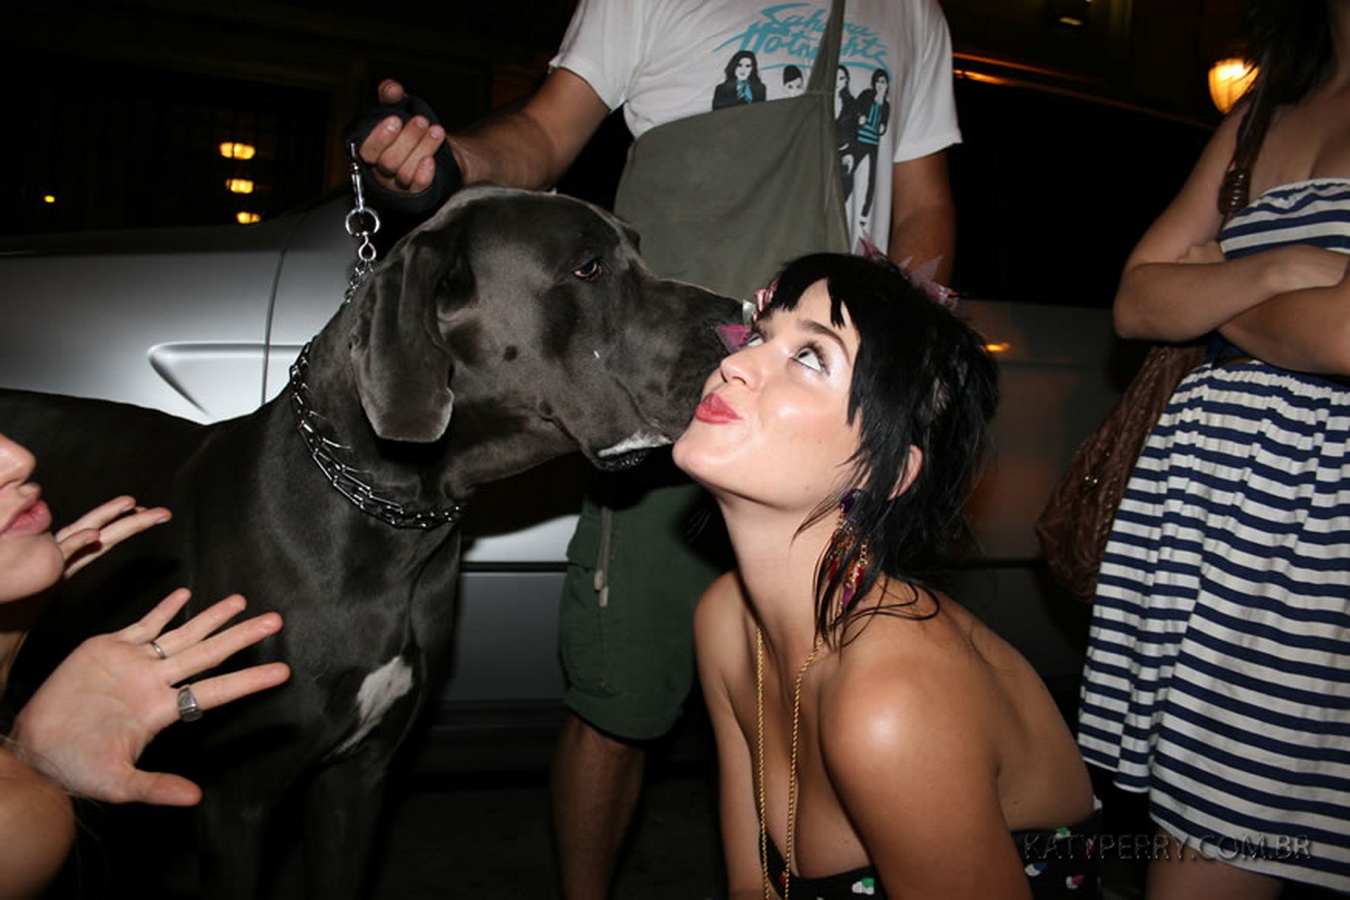 Katy_Perry_bobsslip_drunk_cleavage_downblouse_upskirt_nipslip_at_her_birthday_2007_party_99x_HQ_85.jpg